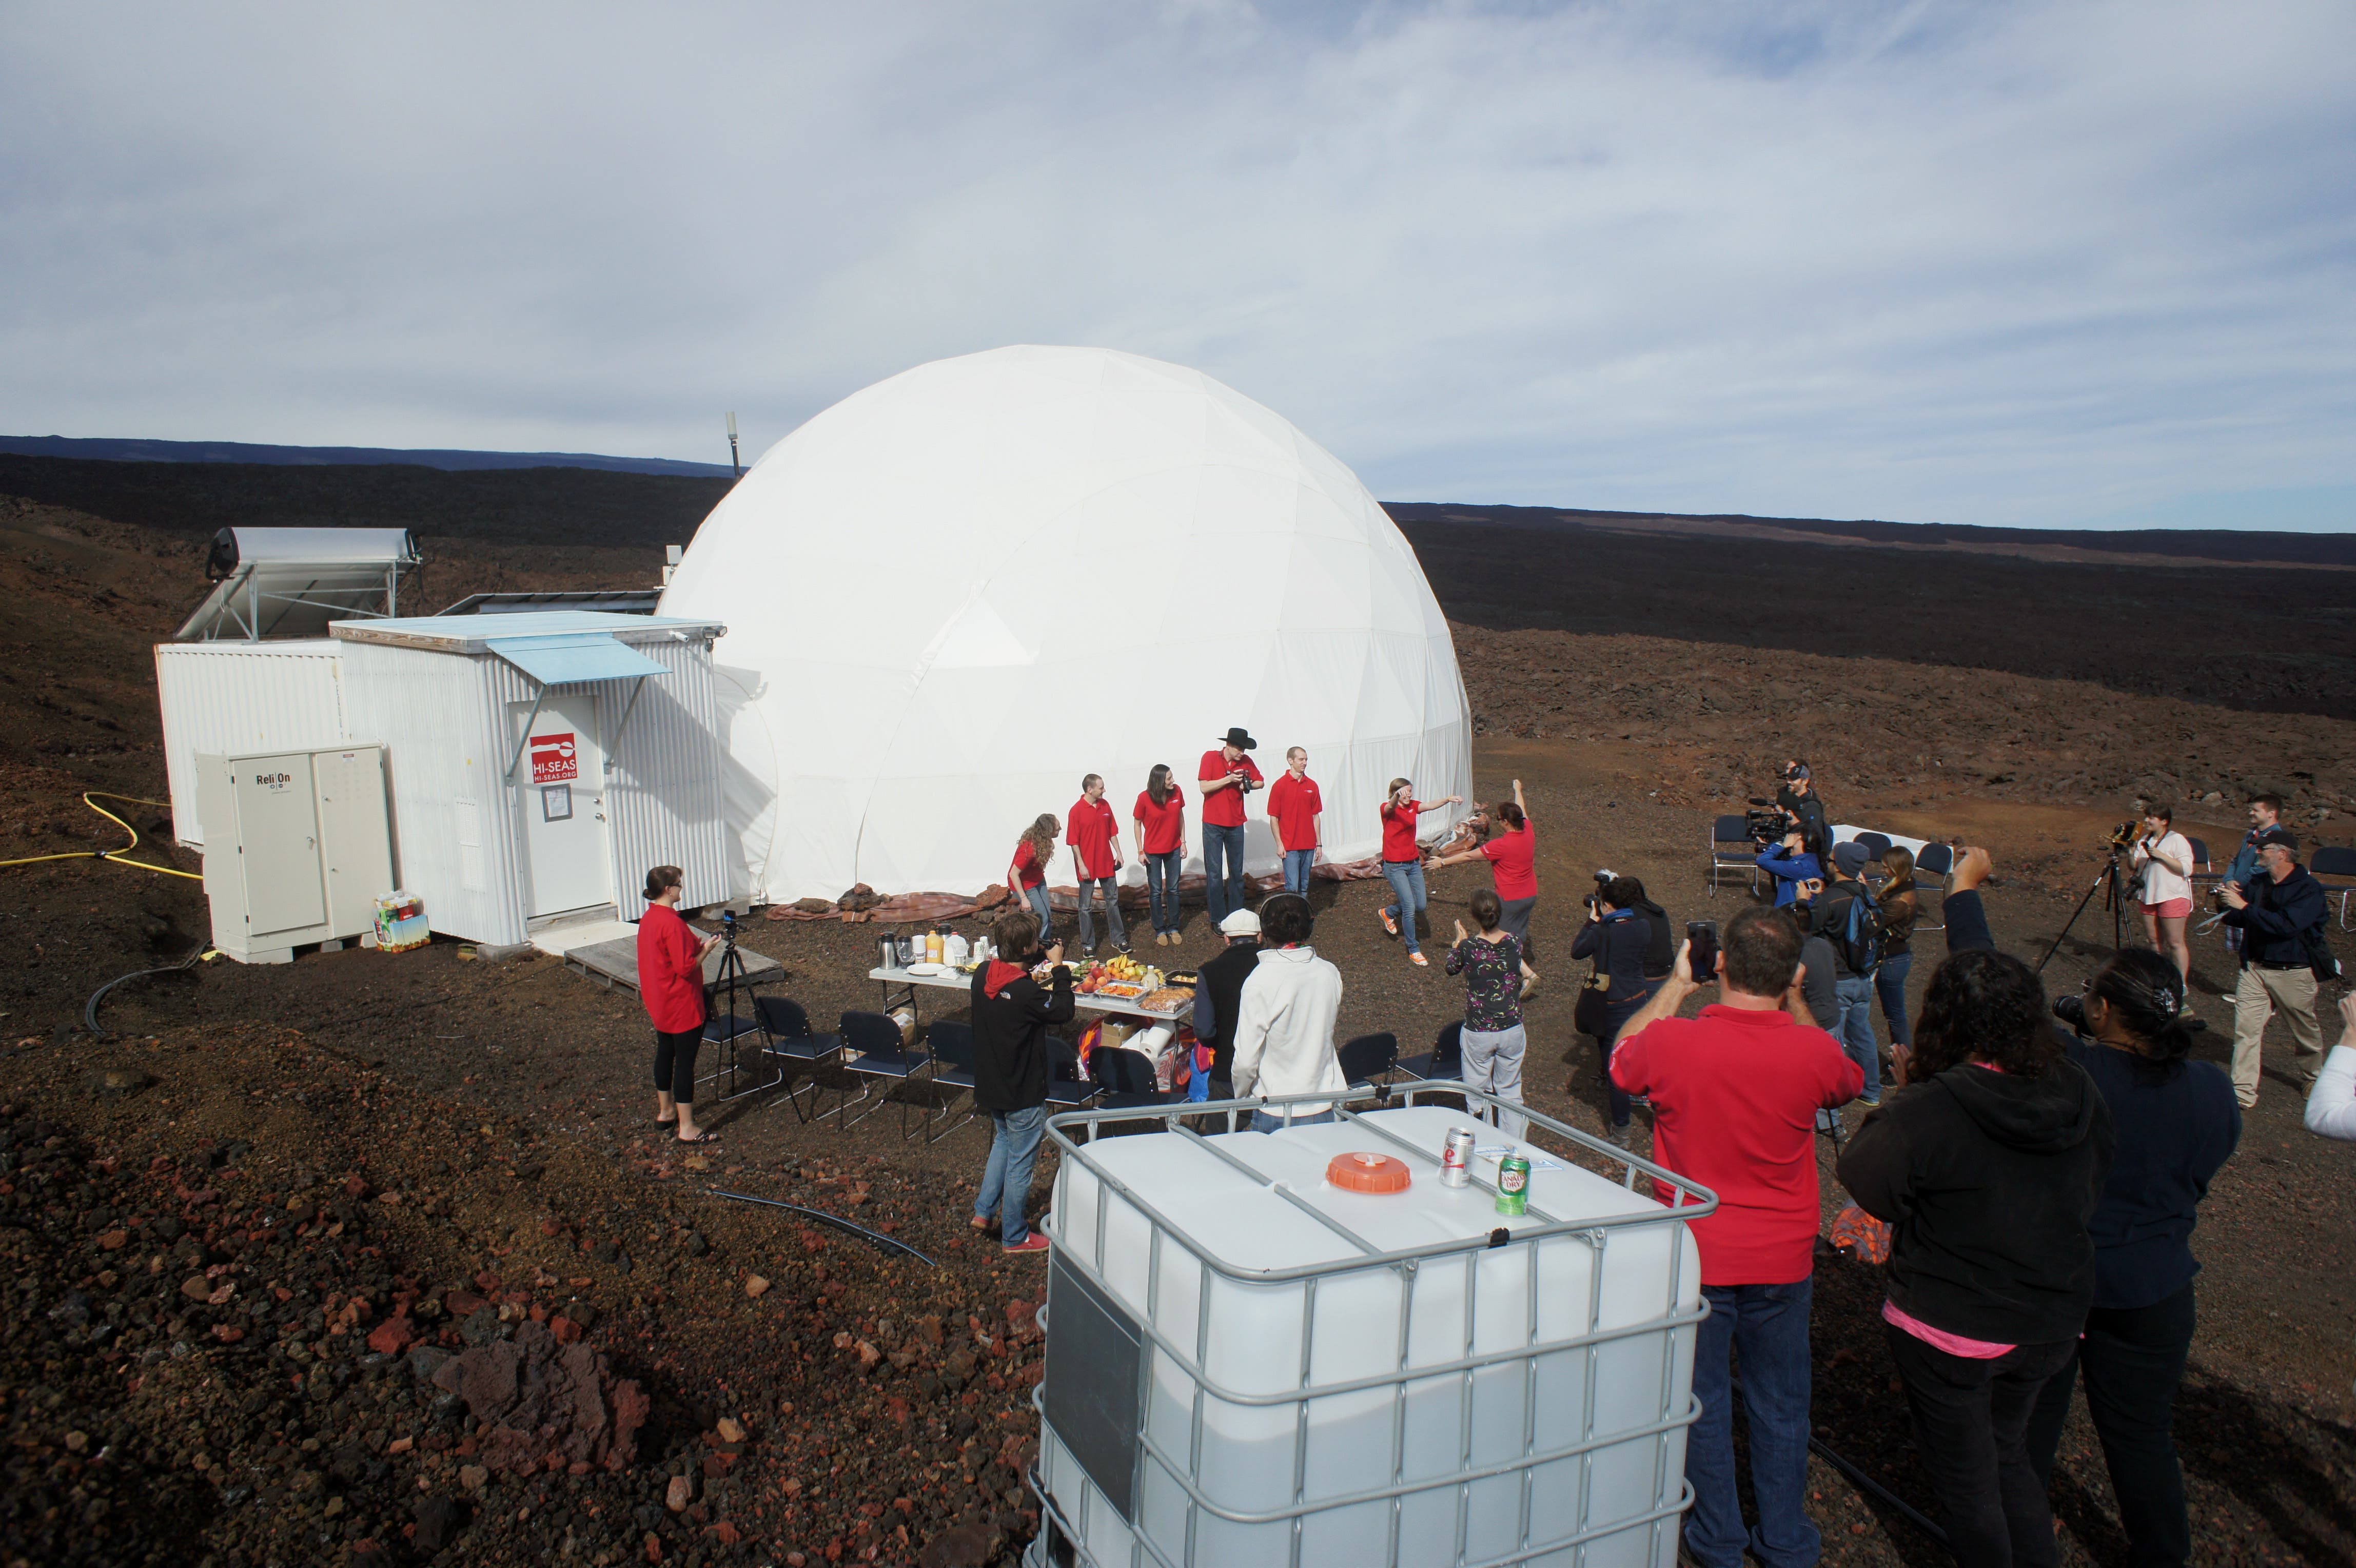 In this photo provided by the University of Hawaii at Manoa HI-SEAS Human Factors Performance Study, six scientists exit a dome that they lived in as part of an isolated existence to simulate life on a mission to Mars, on the bleak slopes of dormant volcano Mauna Loa near Hilo on the Big Island of Hawaii, Saturday, June 13, 2015. The scientists who took part of a human performance study funded by NASA, stepped outside the dome at 8,000 feet elevation to feel fresh air on their skin Saturday, the first time they'd ventured out without donning a space suit in eight months. (Ryan Ogliore/University of Hawaii at Manoa via AP) MANDATORY CREDIT